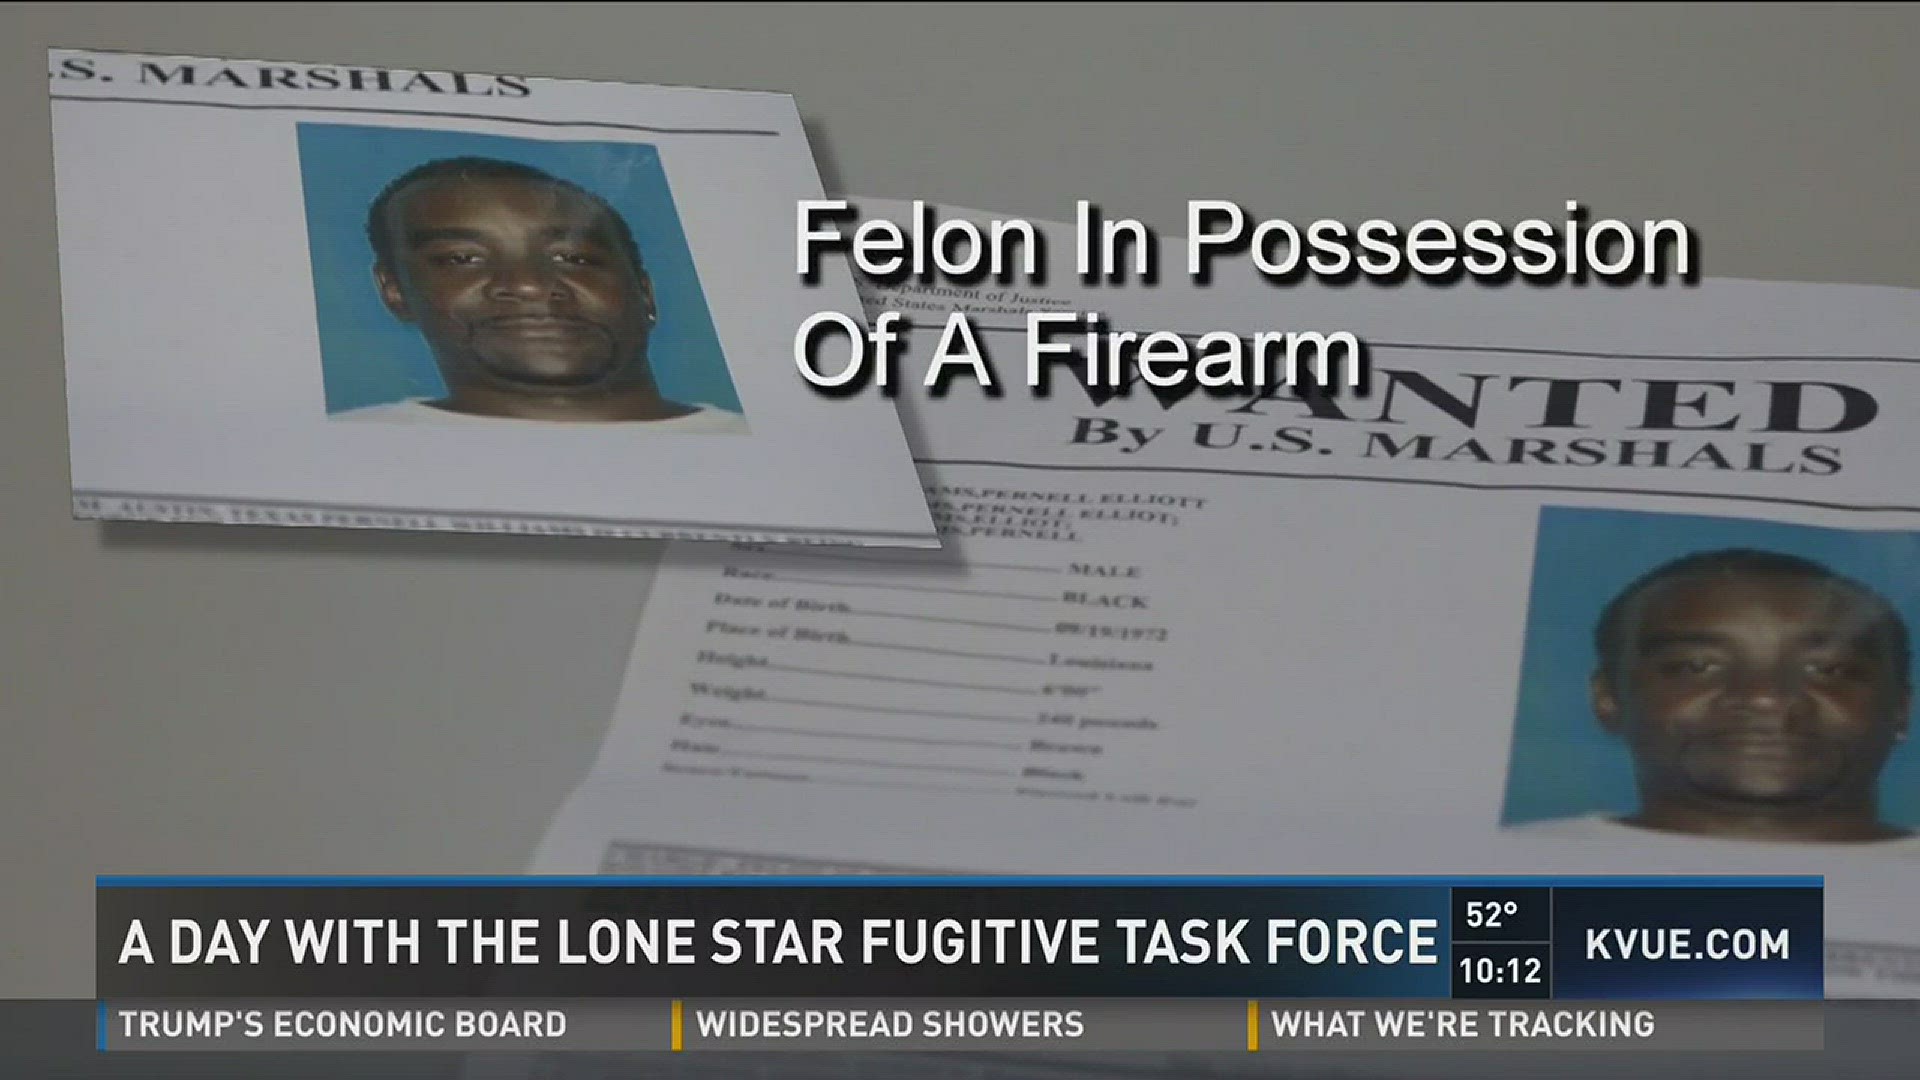 Day with the Lone Star Fugitive Task Force